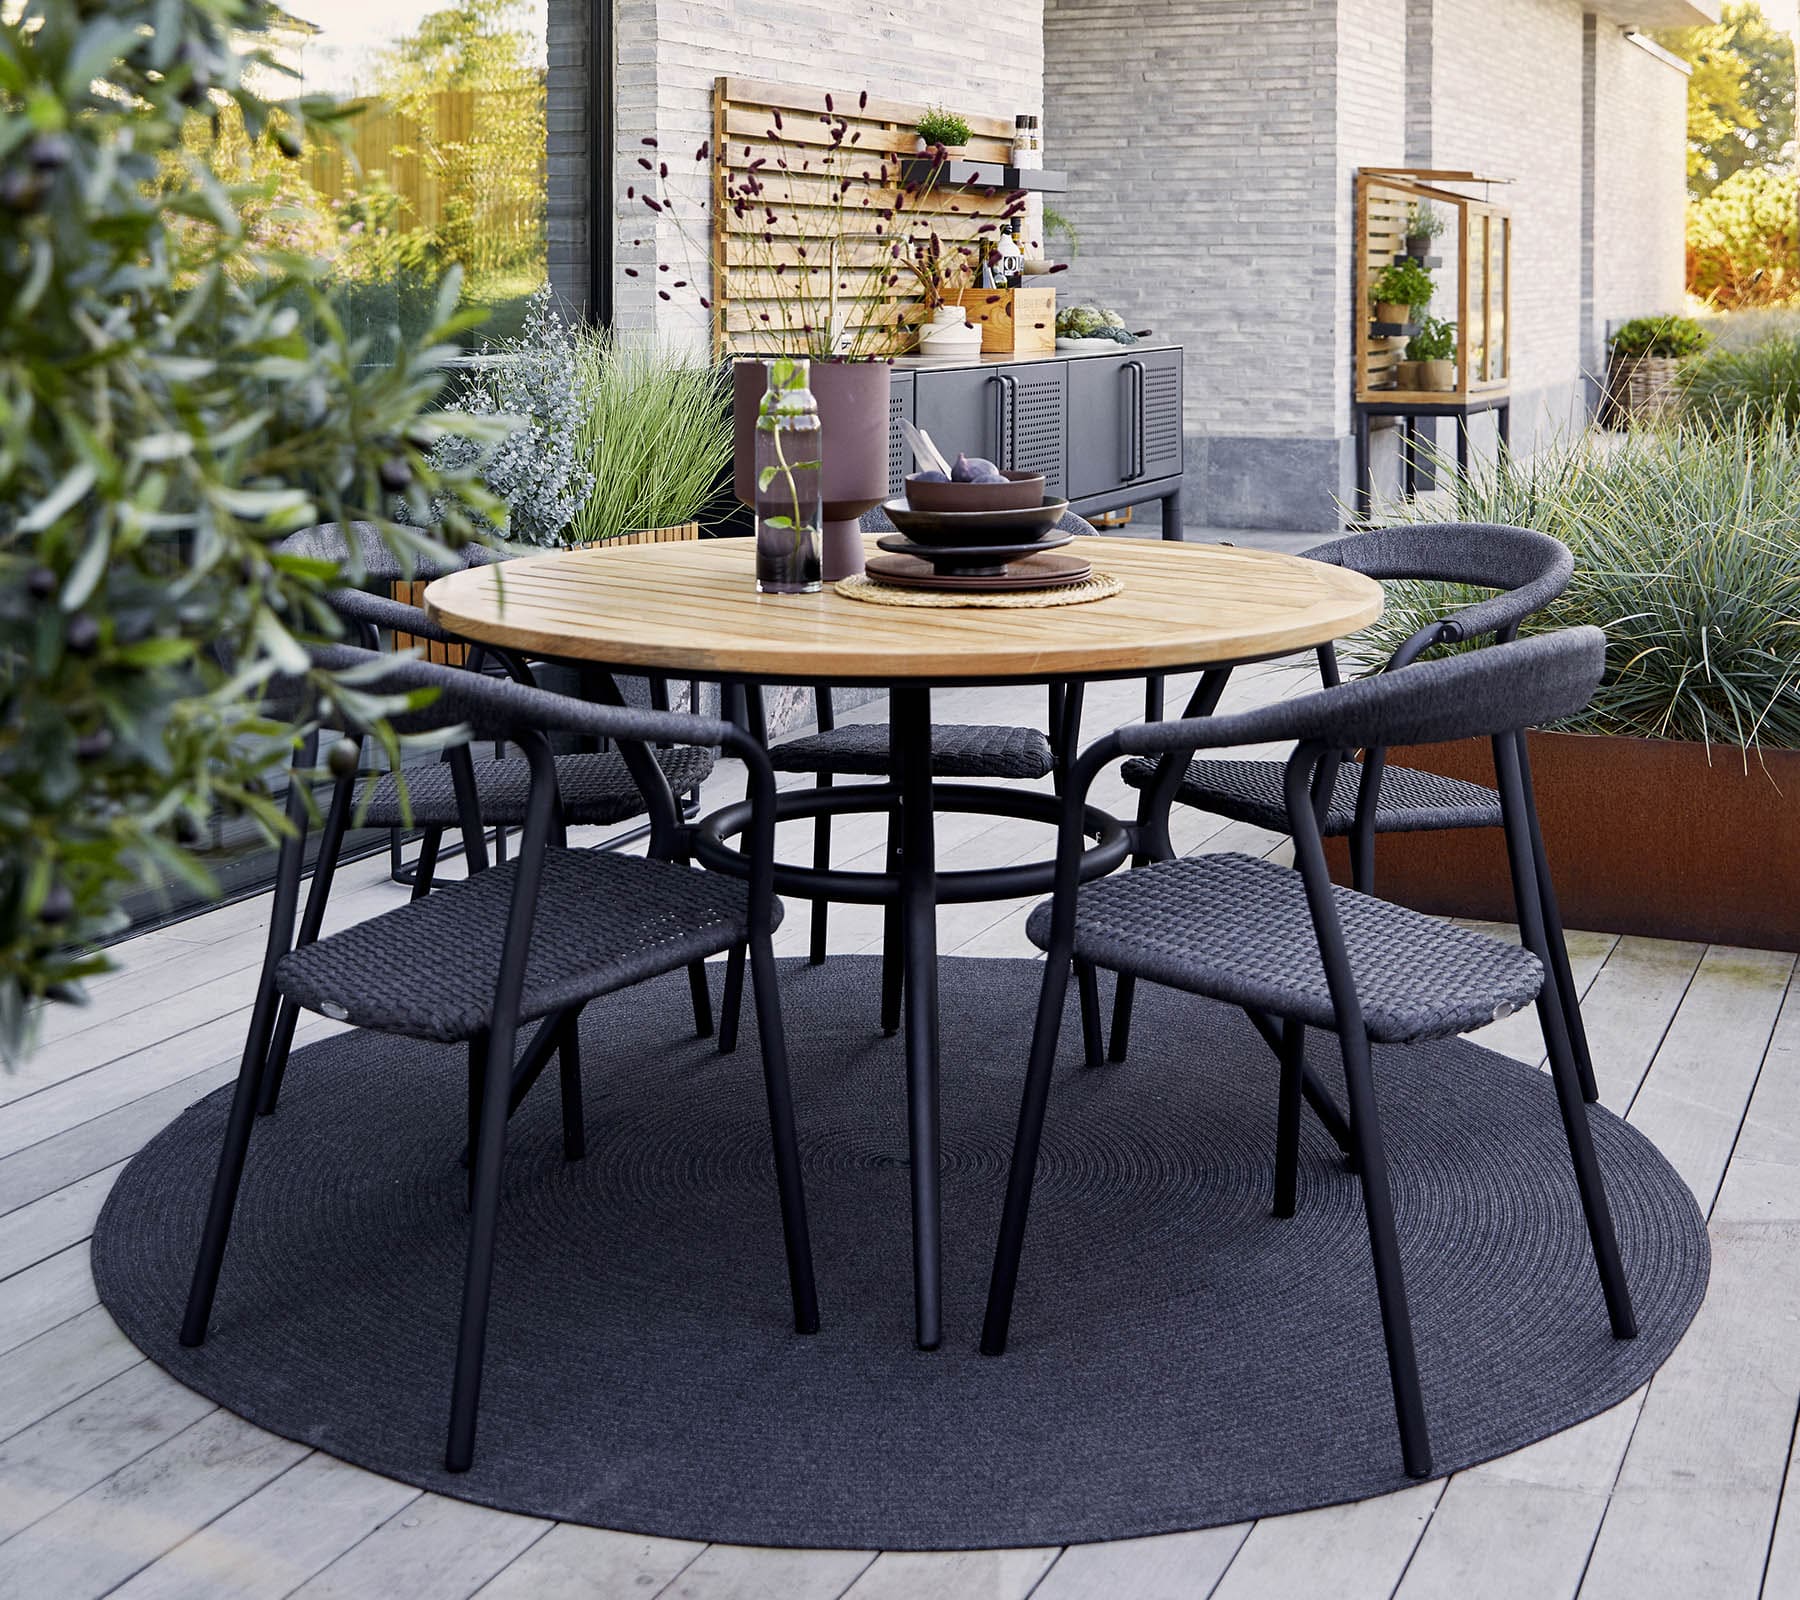 Boxhill's Joy Round Outdoor Dining Table Lifestyle image with 5 dining chairs at patio